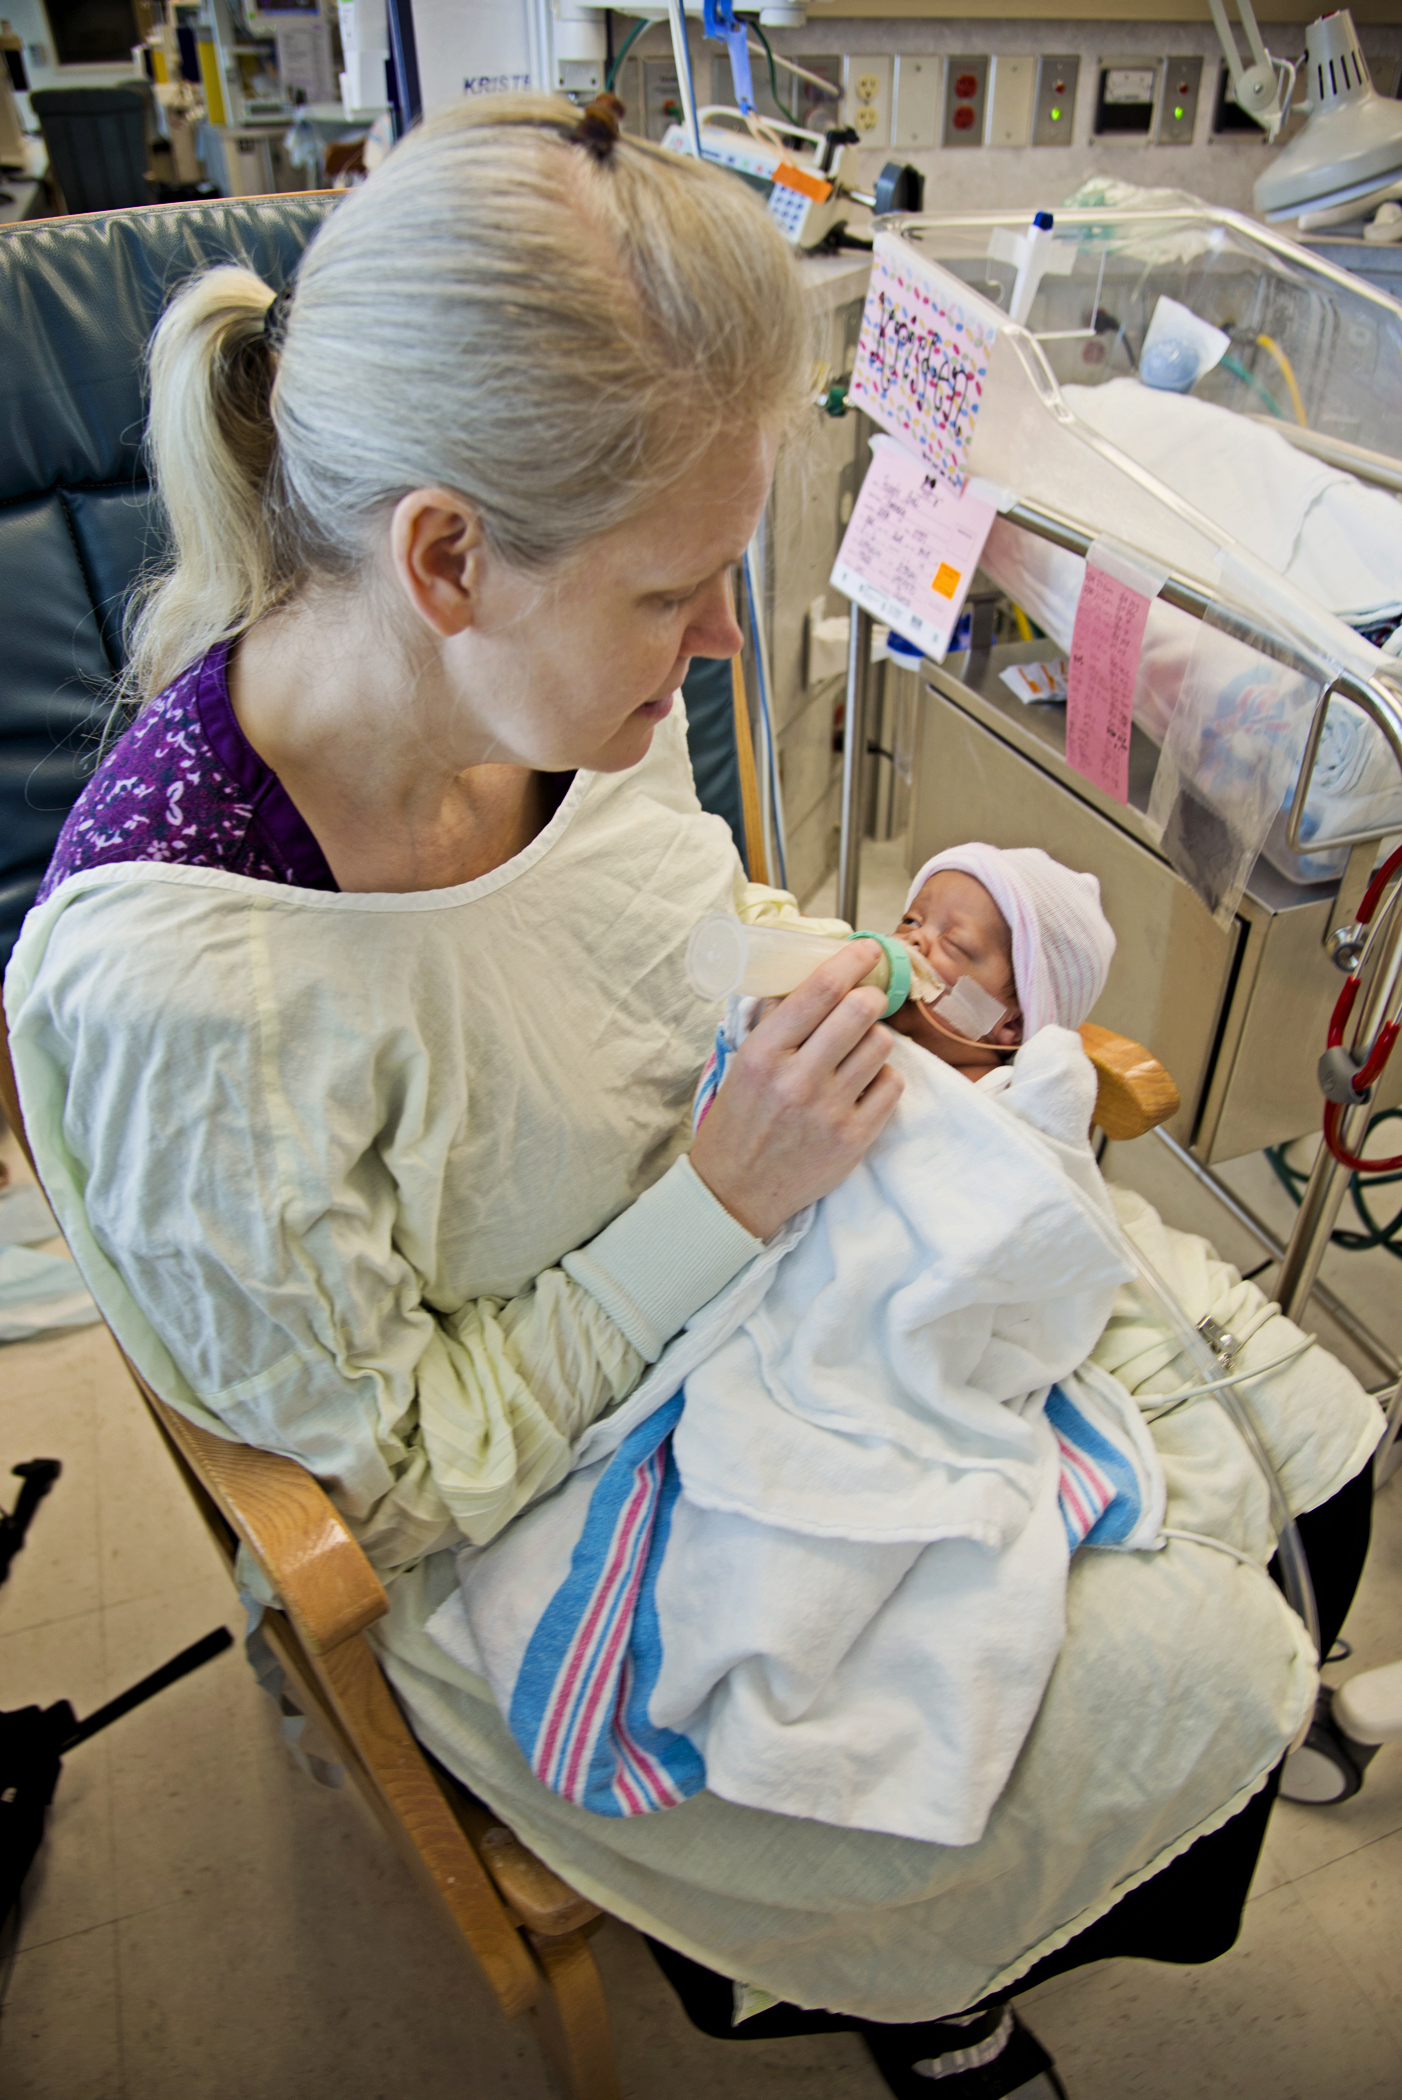 Kimberly Fugate gives Kristen, one of her four identical daughters, her first bottle in the Neonatal Intensive Care Unit at the University of Mississippi Medical Center.